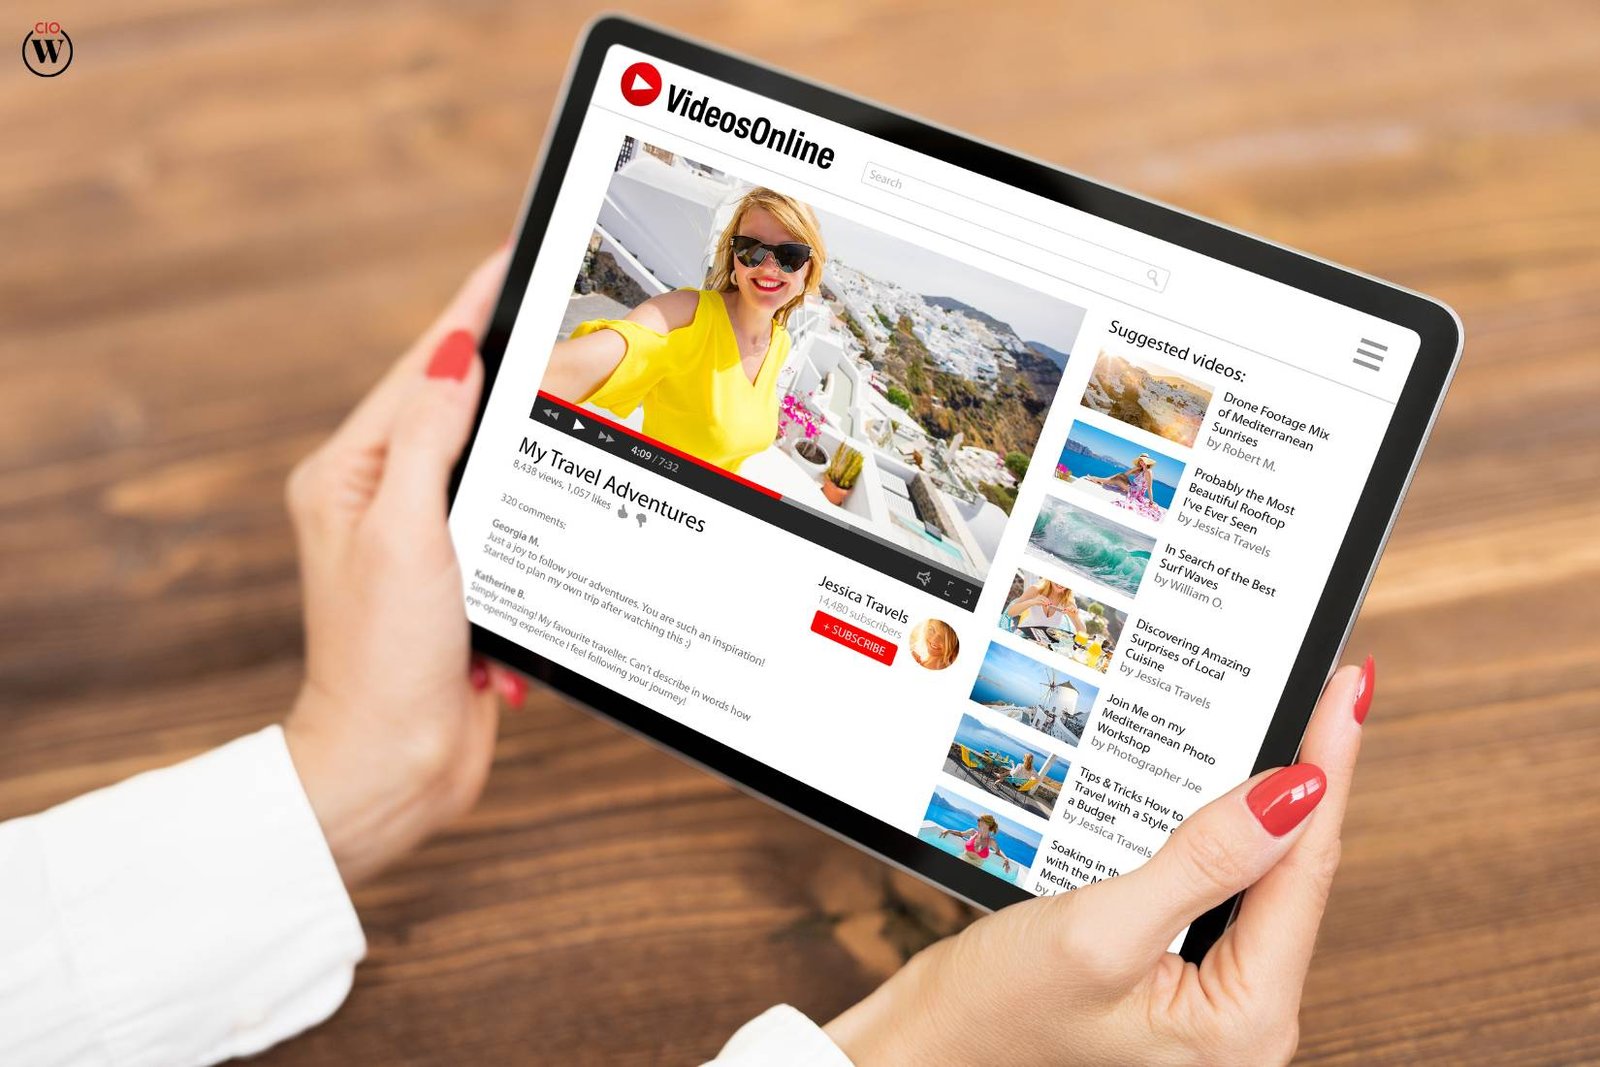 10 Best Tips to Use YouTube for Marketing and Branding | CIO Women Magazine